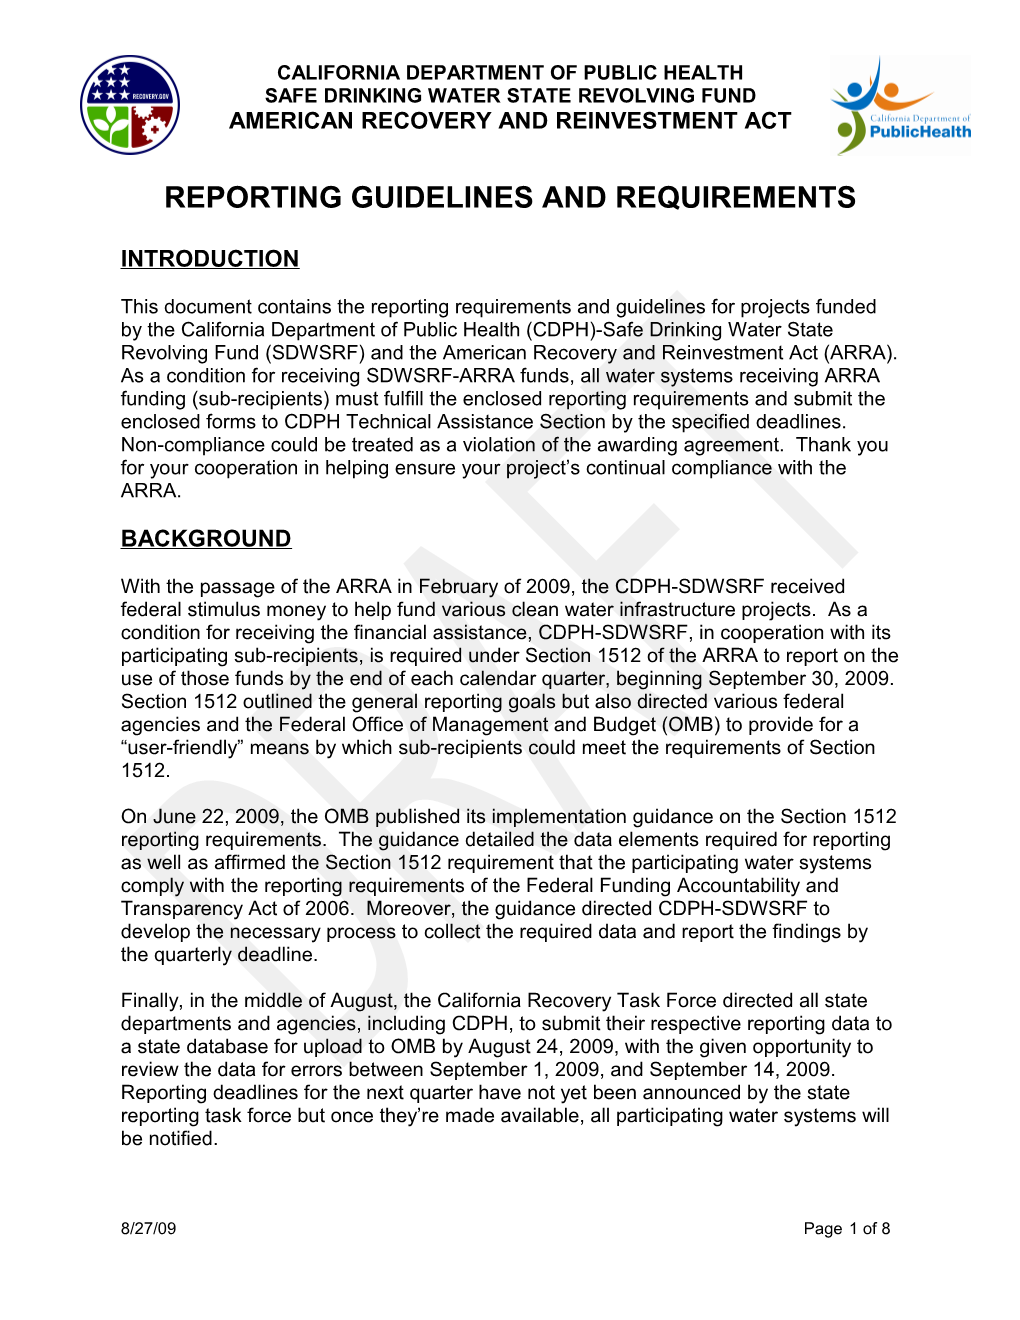 ARRA Project Reporting Guidelines and Requirements 08-27-2009